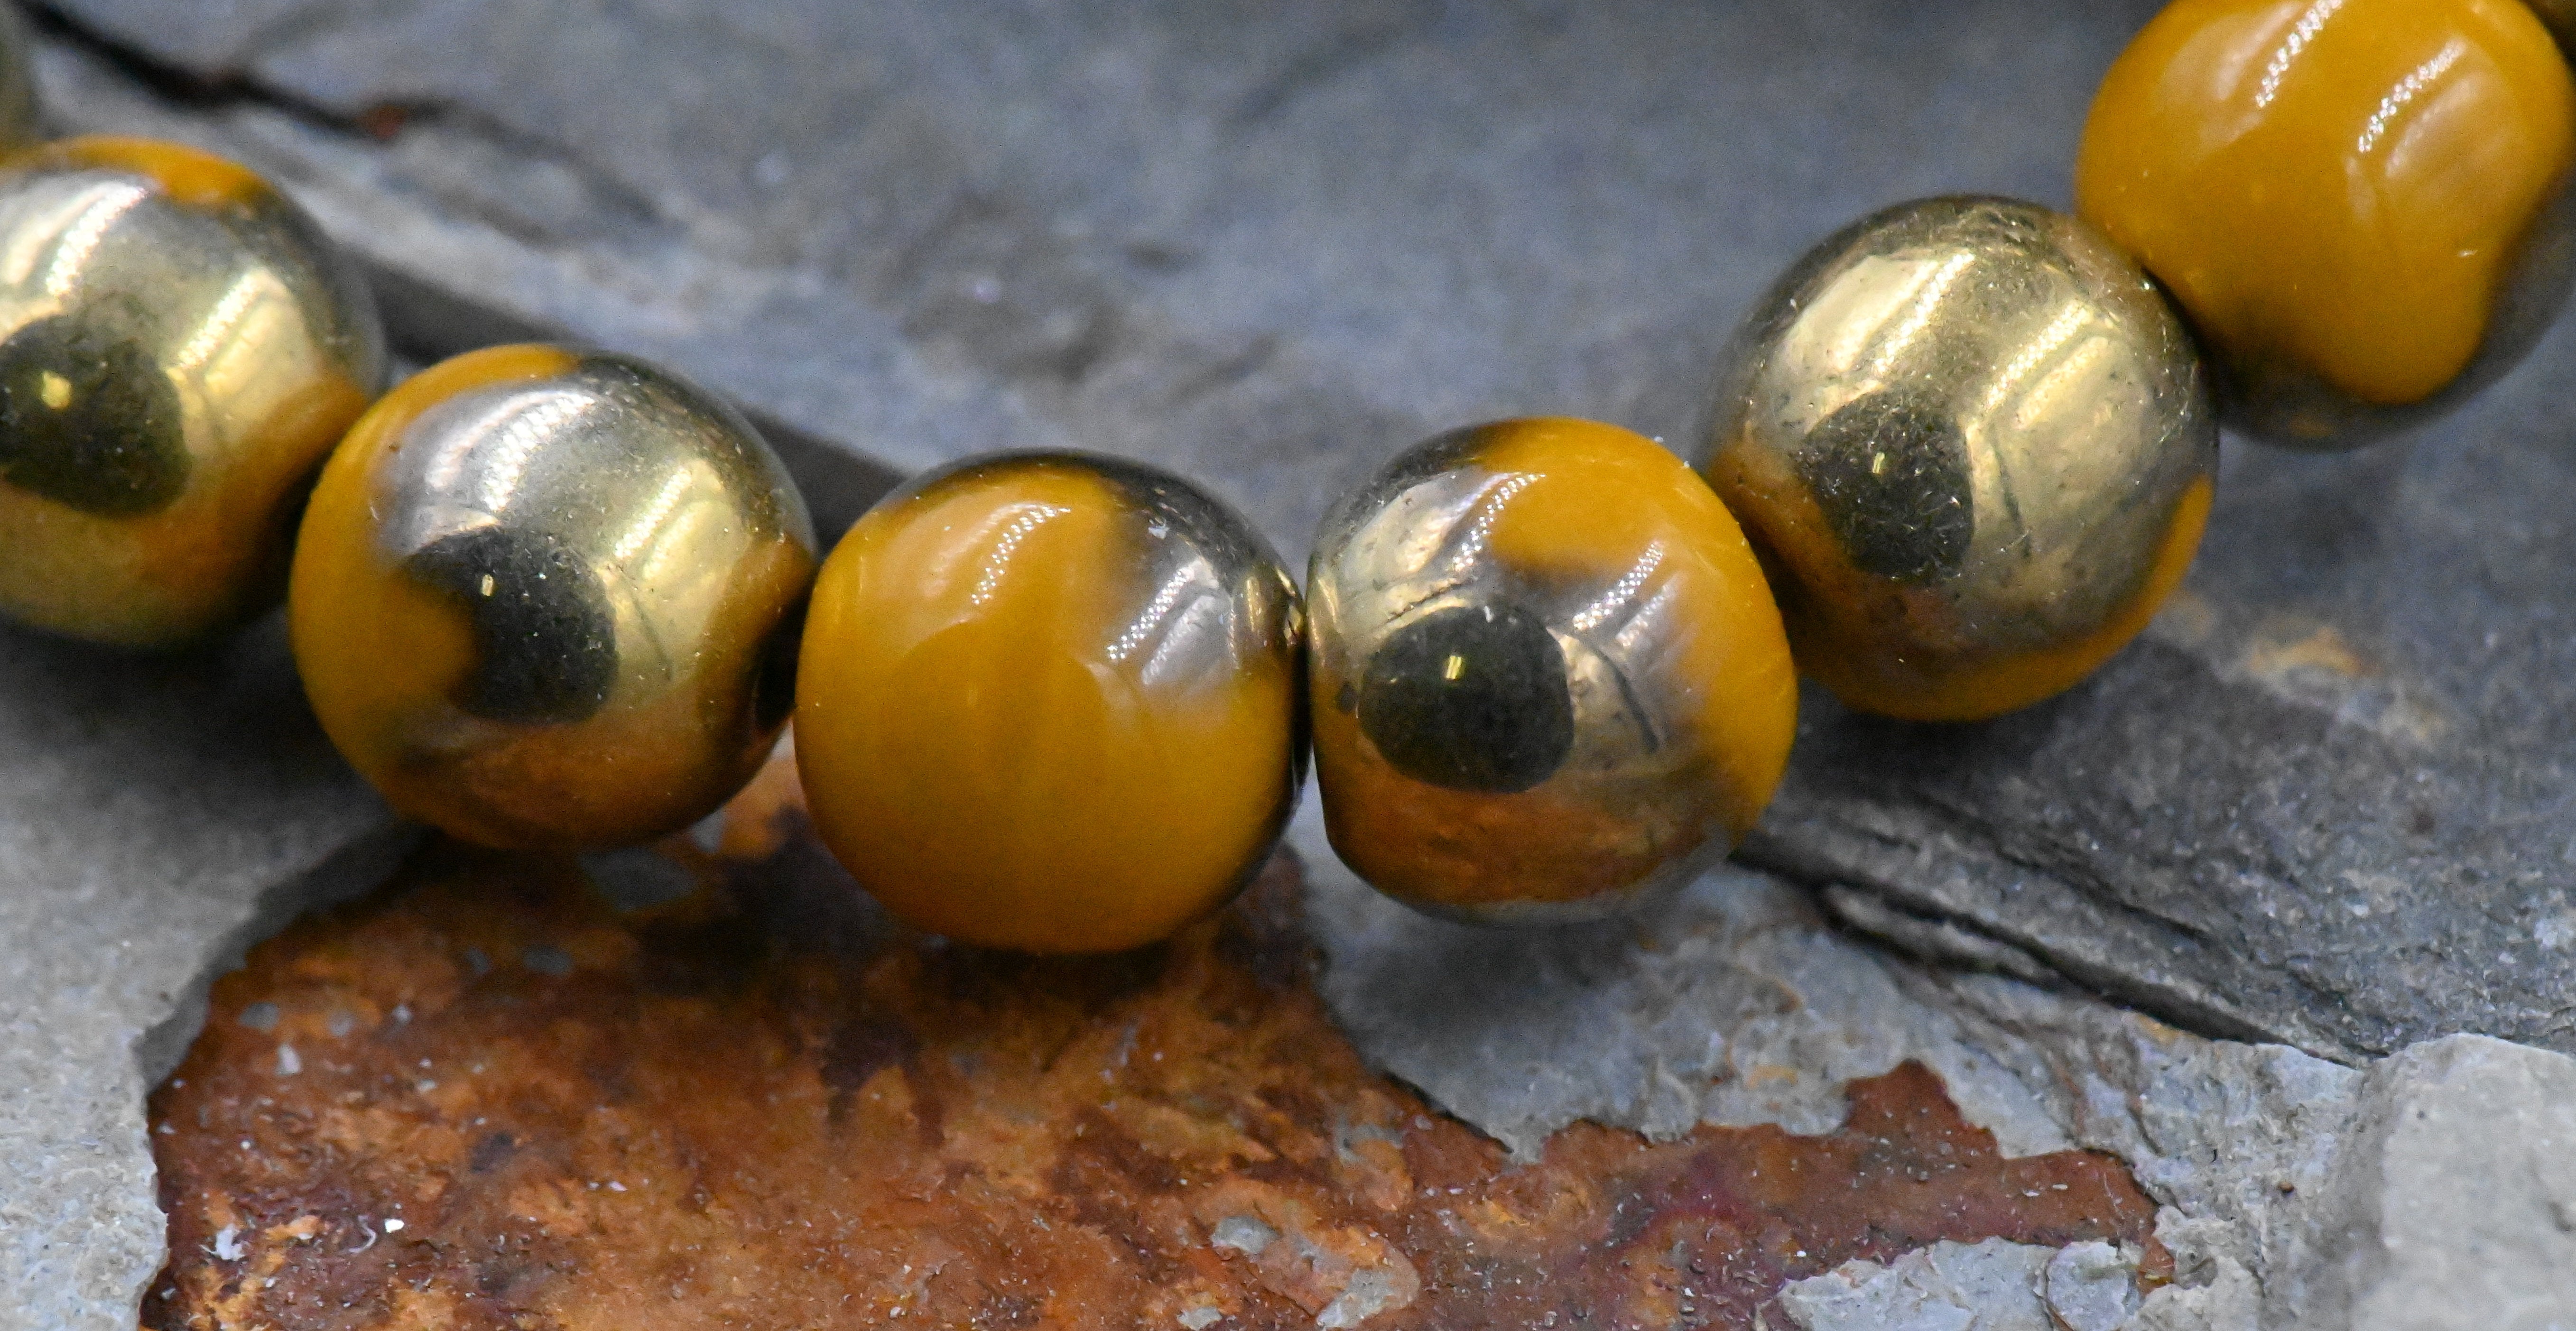 6mm Round 30pc Mustard Yellow with Gold Finish